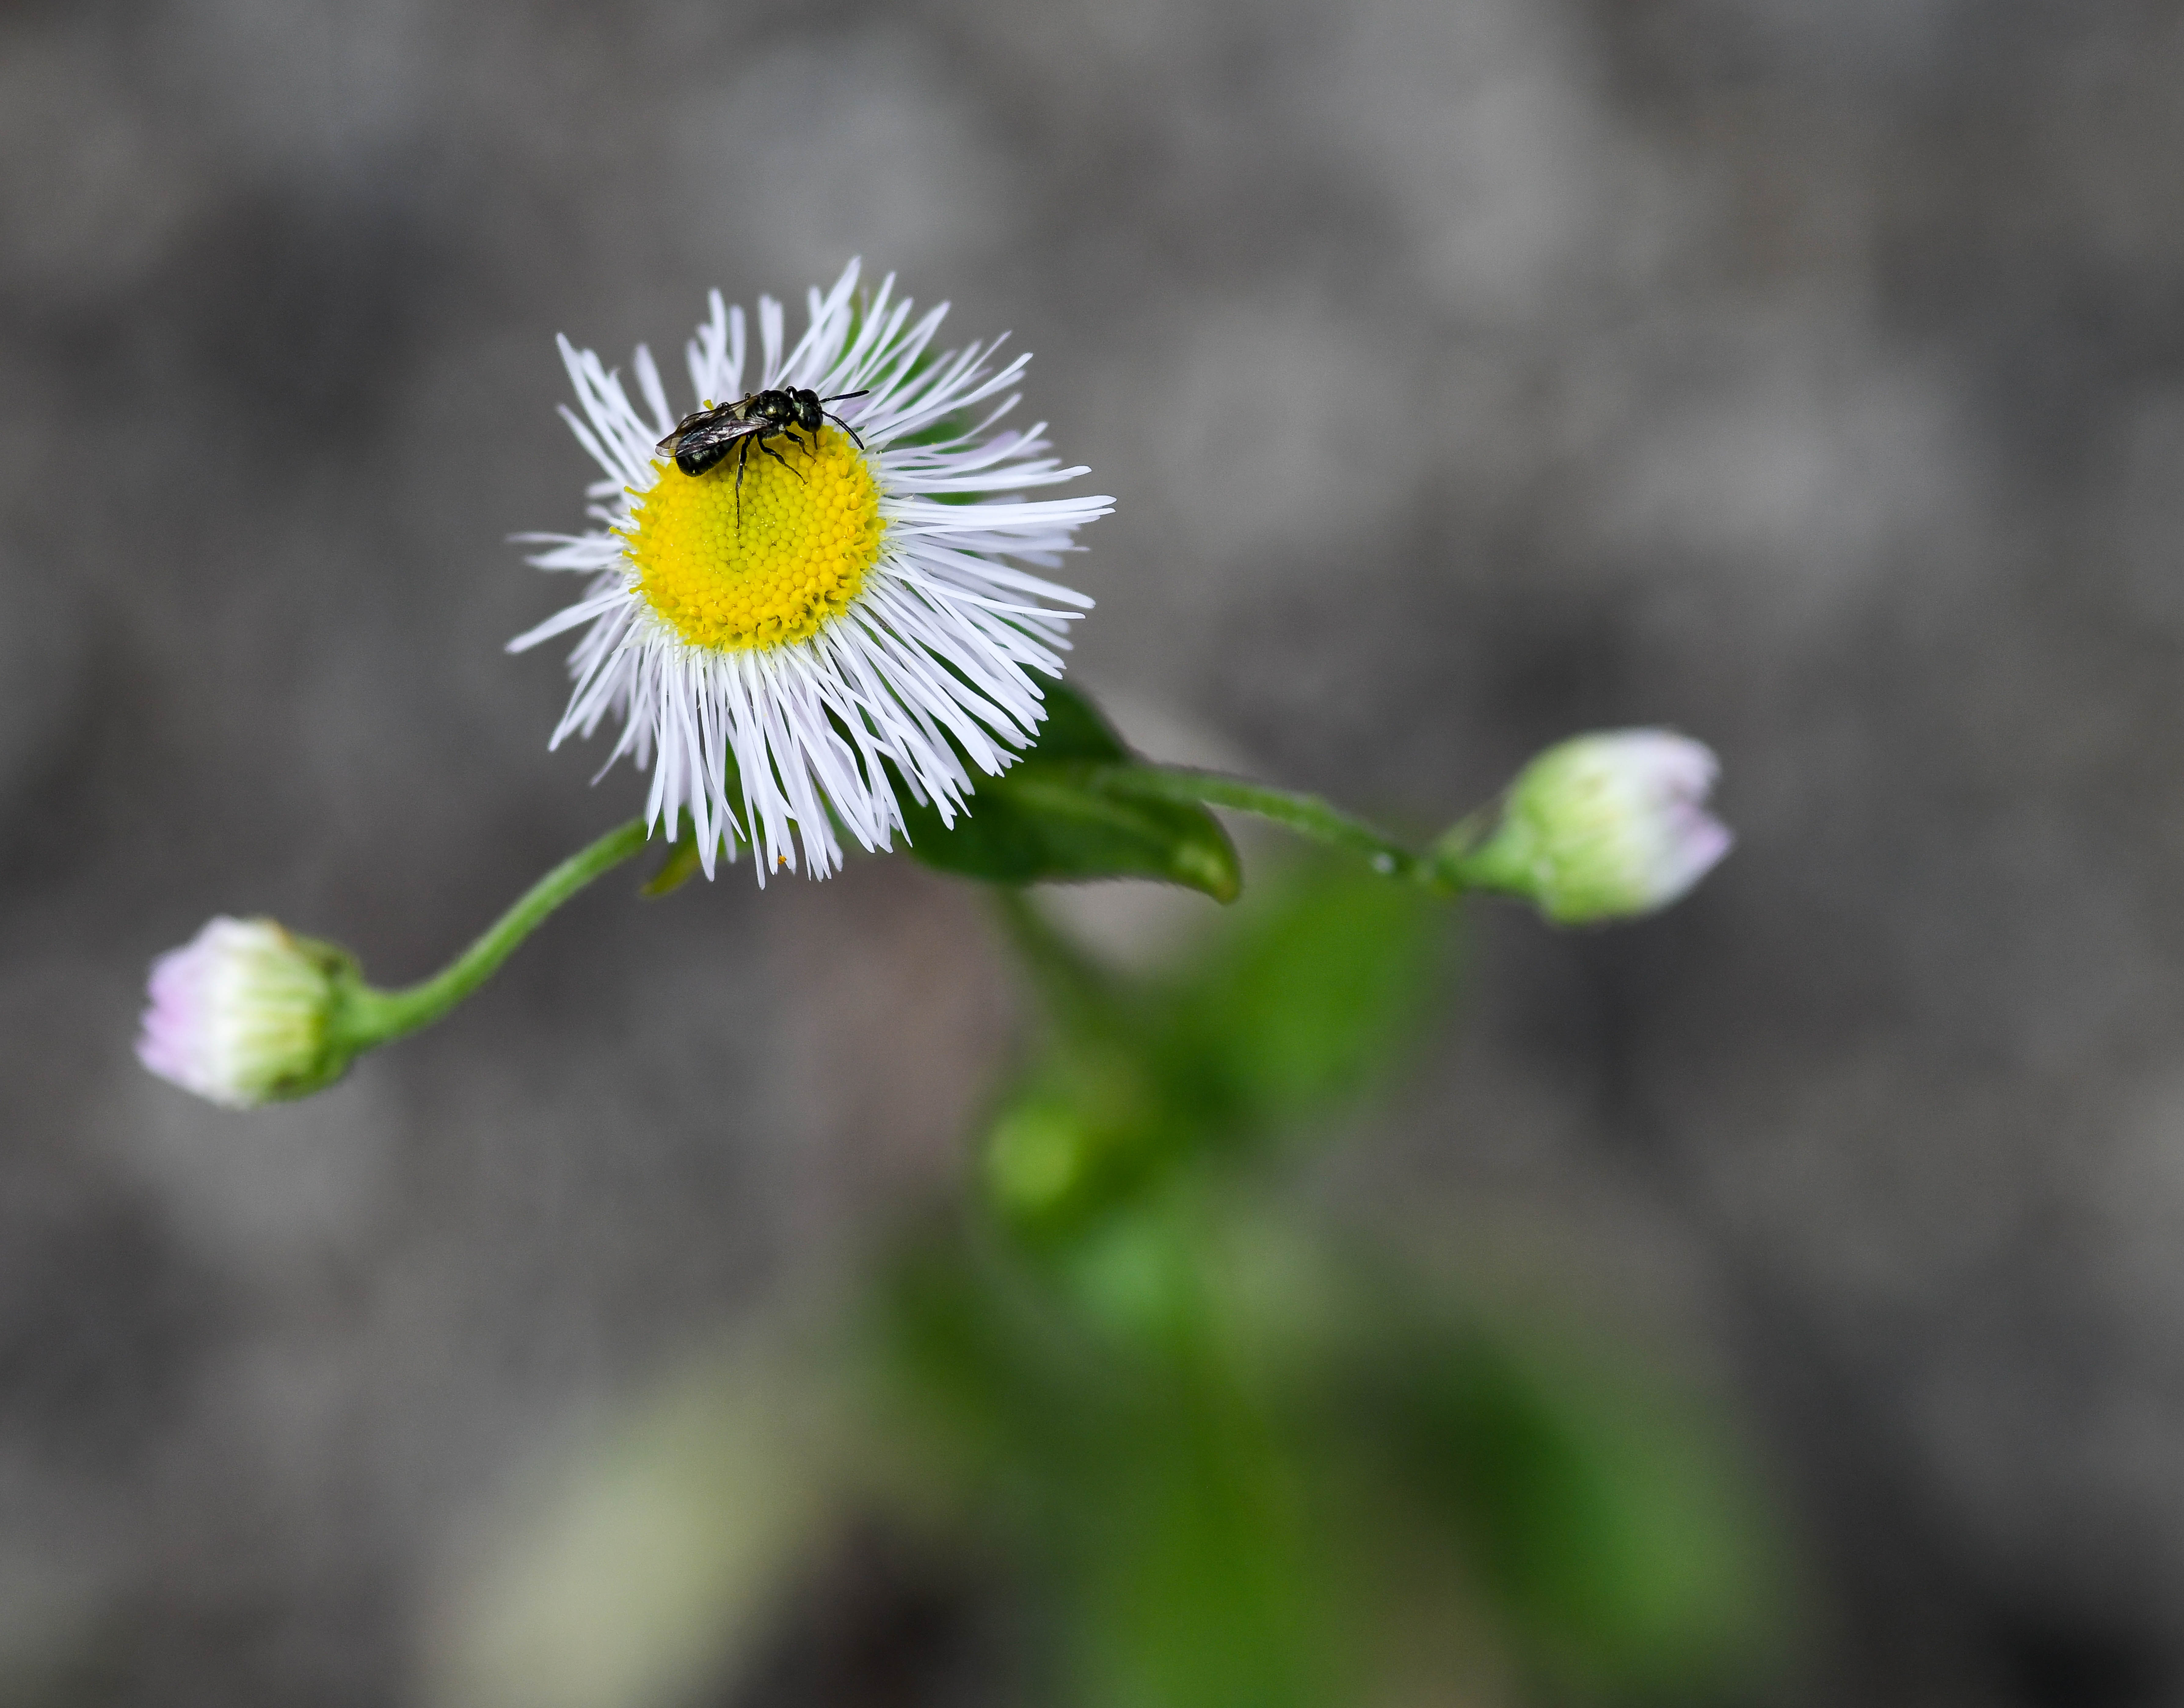 An insect crawls over the bloom of a daisy fleabane plant at Arnold Air Force Base, Tenn., April 7, 2021. (U.S. Air Force photo by Jill Pickett)